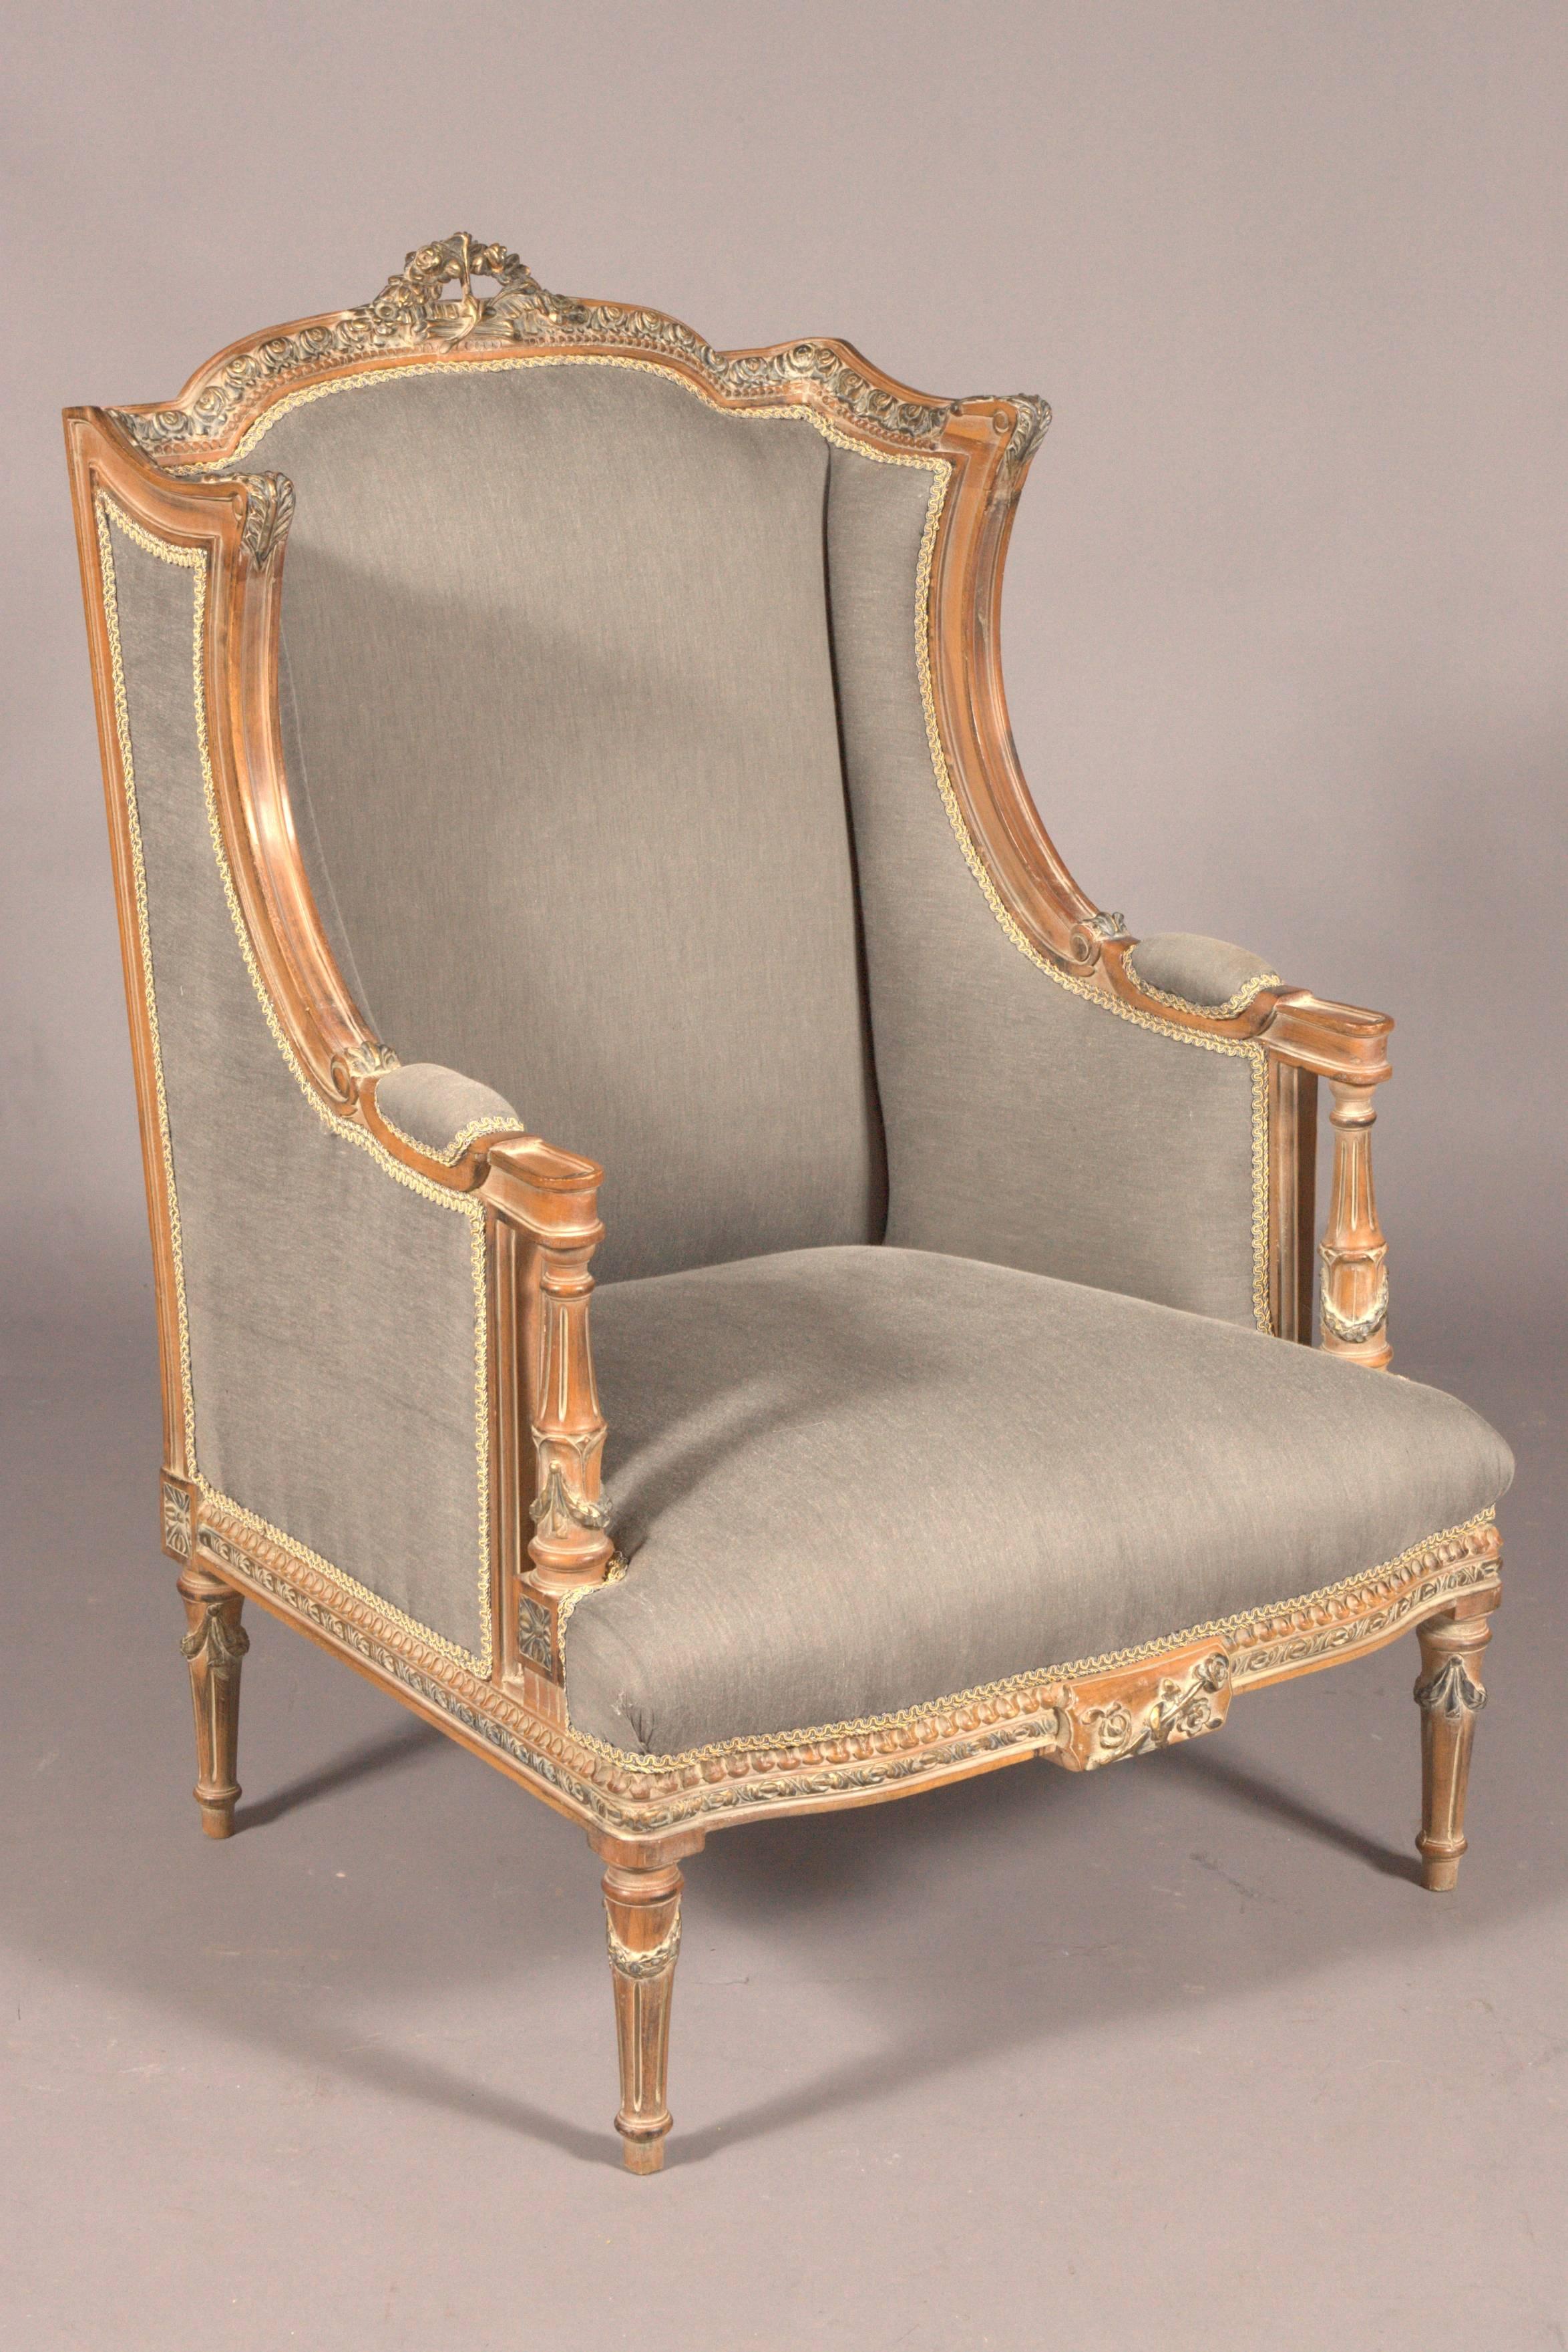 20th Century Classic Seating Set of Three Pieces in the Louis XVI Style (Buchenholz)